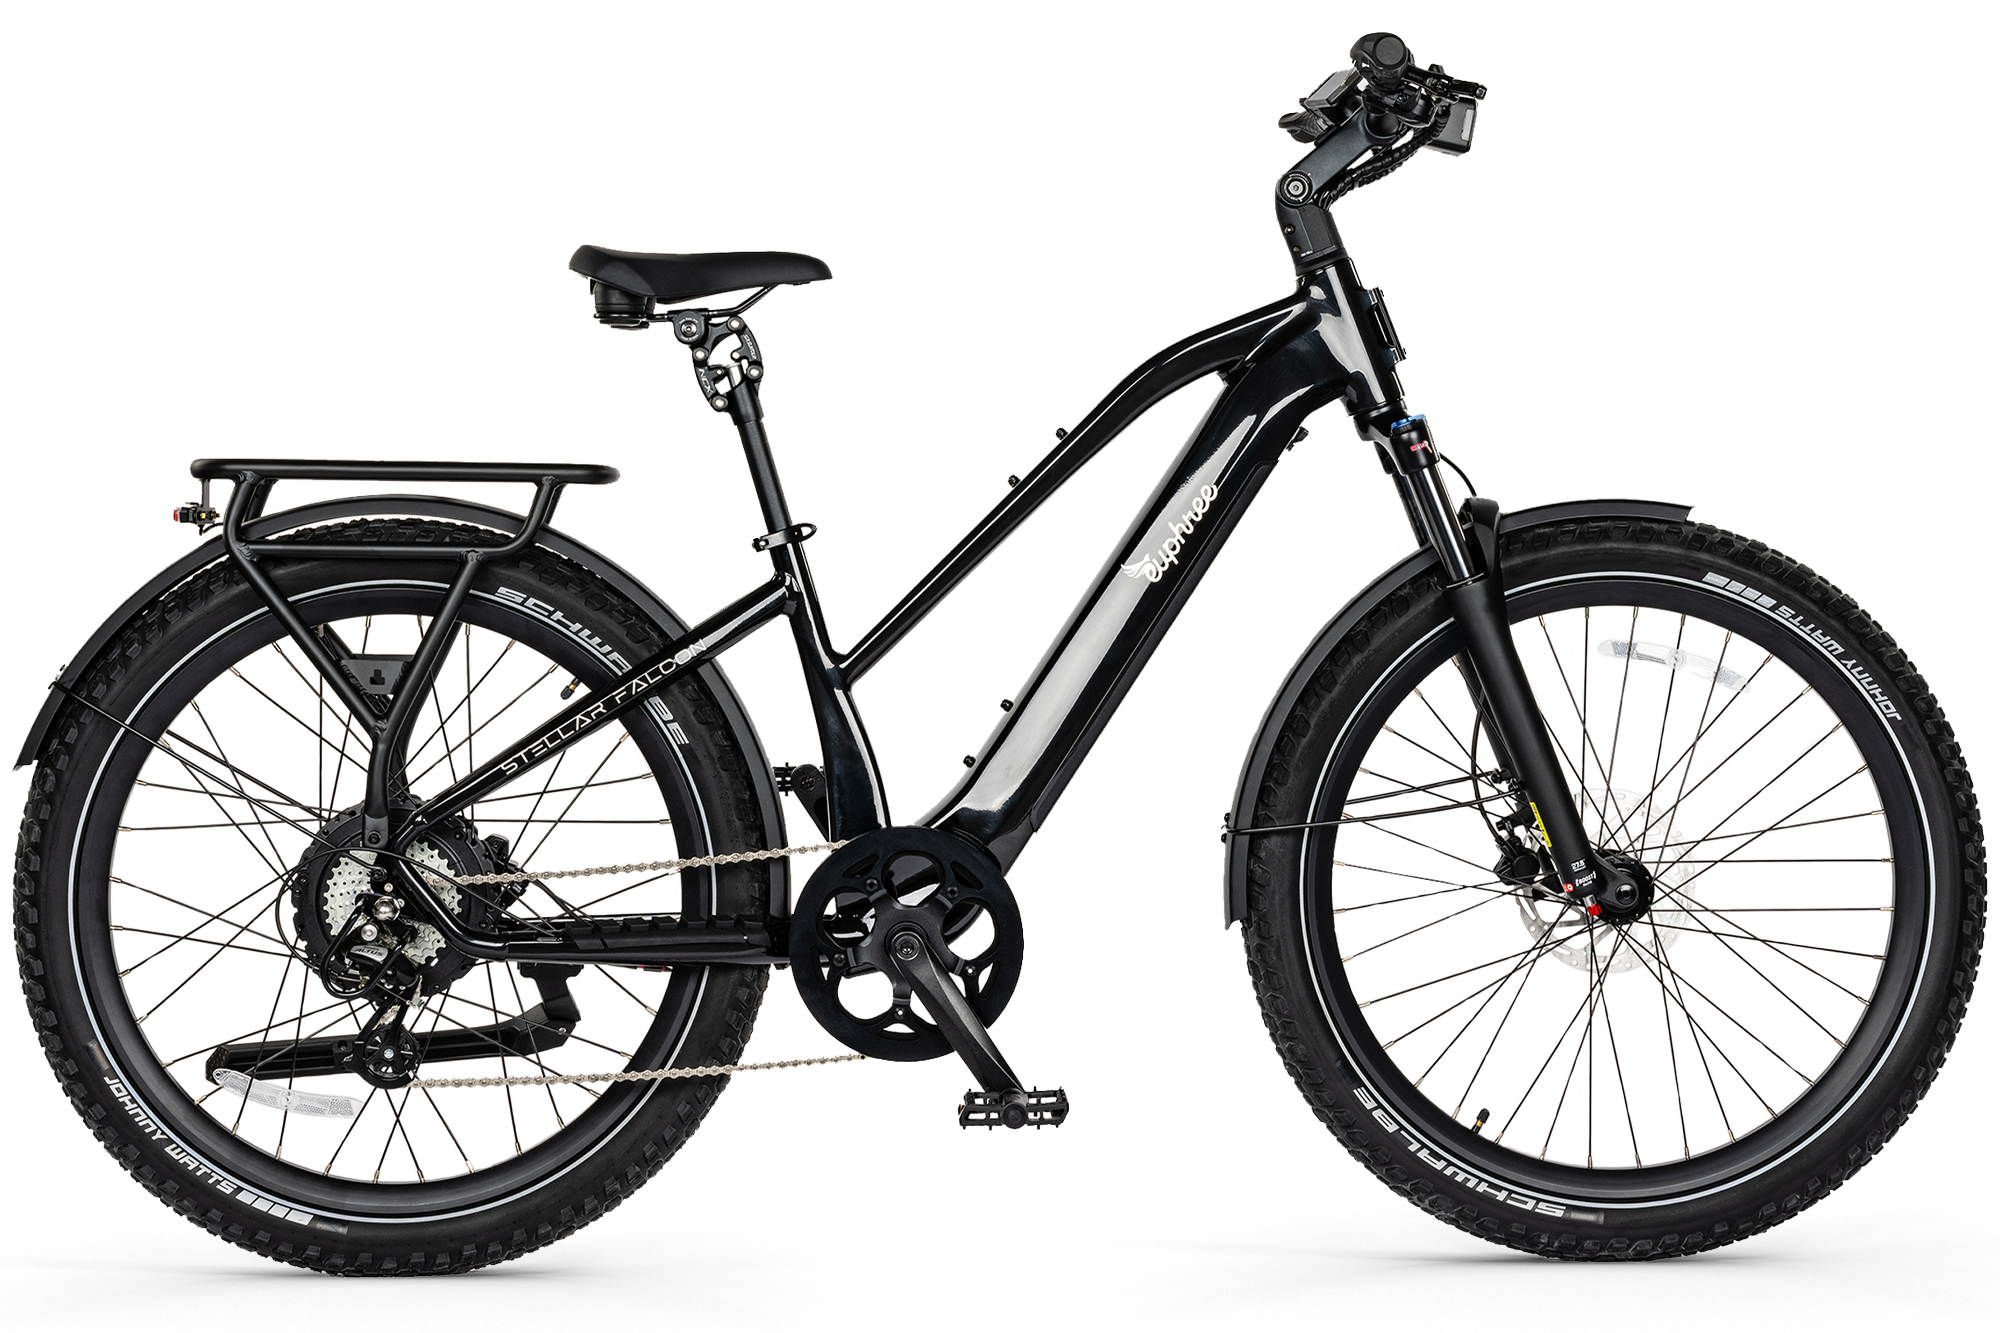 Classic Eclipse Black Euphree Stellar Falcon electric bike, featuring a timeless look with its step-through frame and patented integrated wiring system for a clean aesthetic.